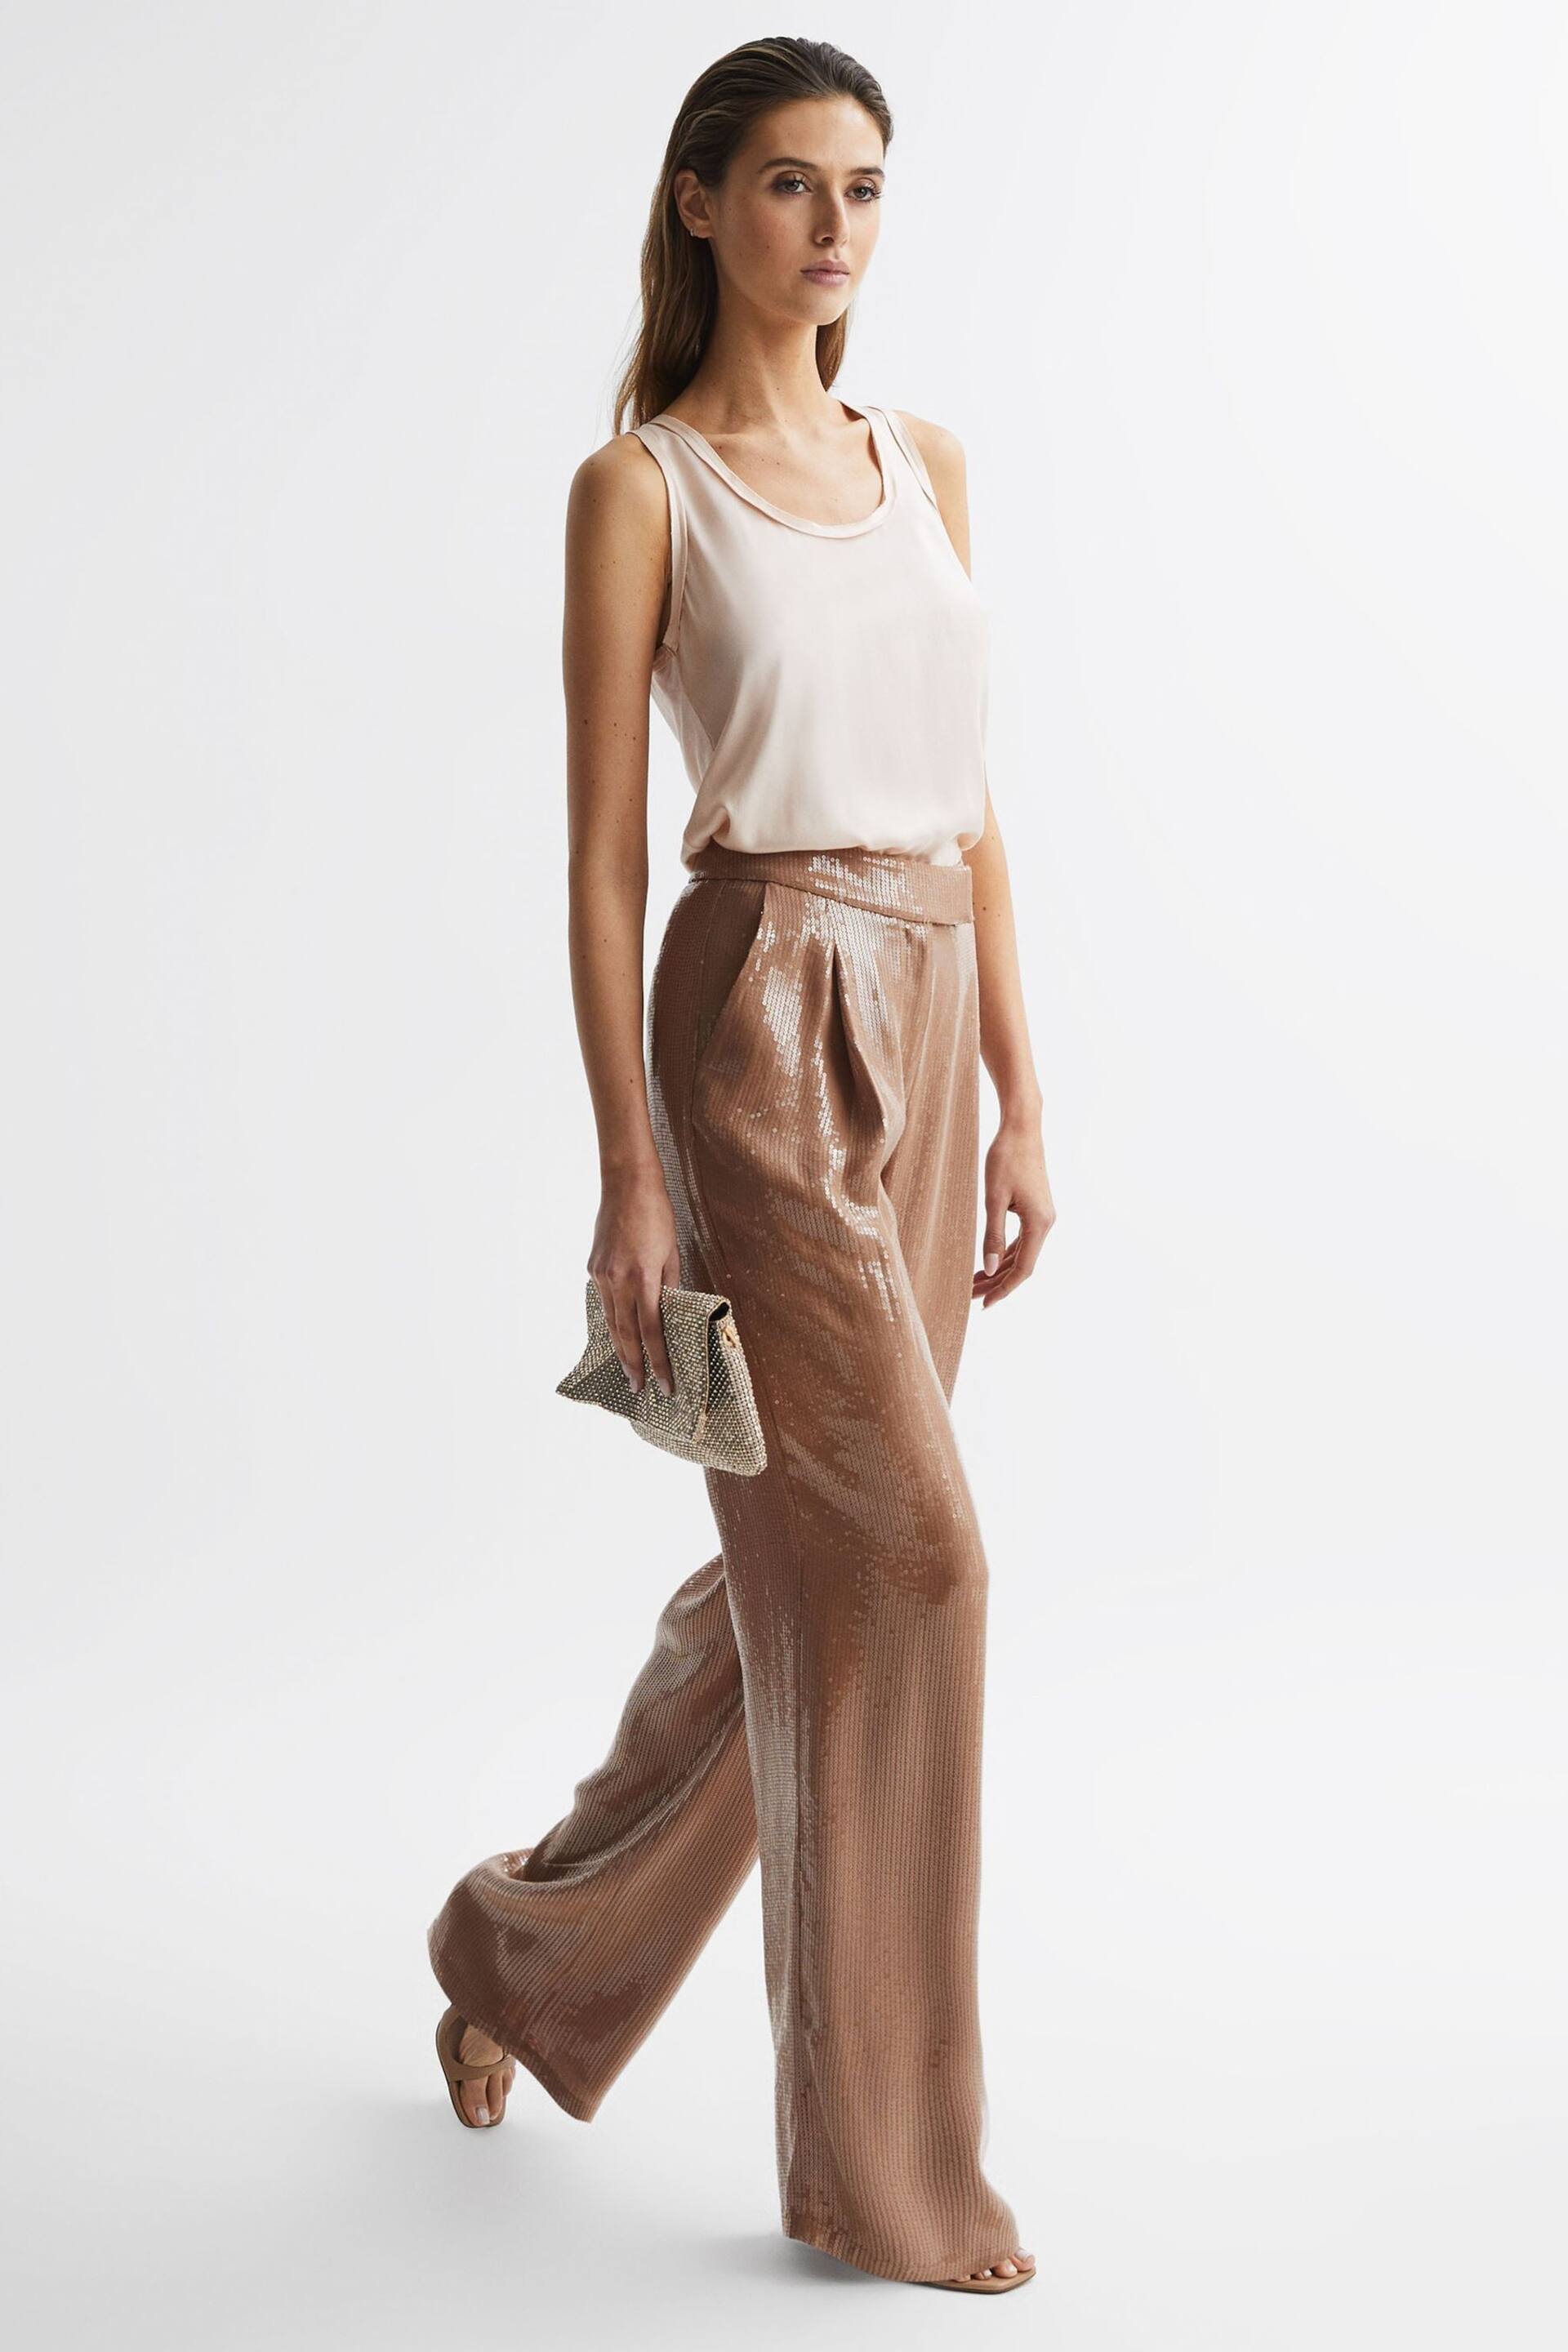 Reiss Nude Lizzie Sequin Wide Leg Trousers - Image 7 of 7